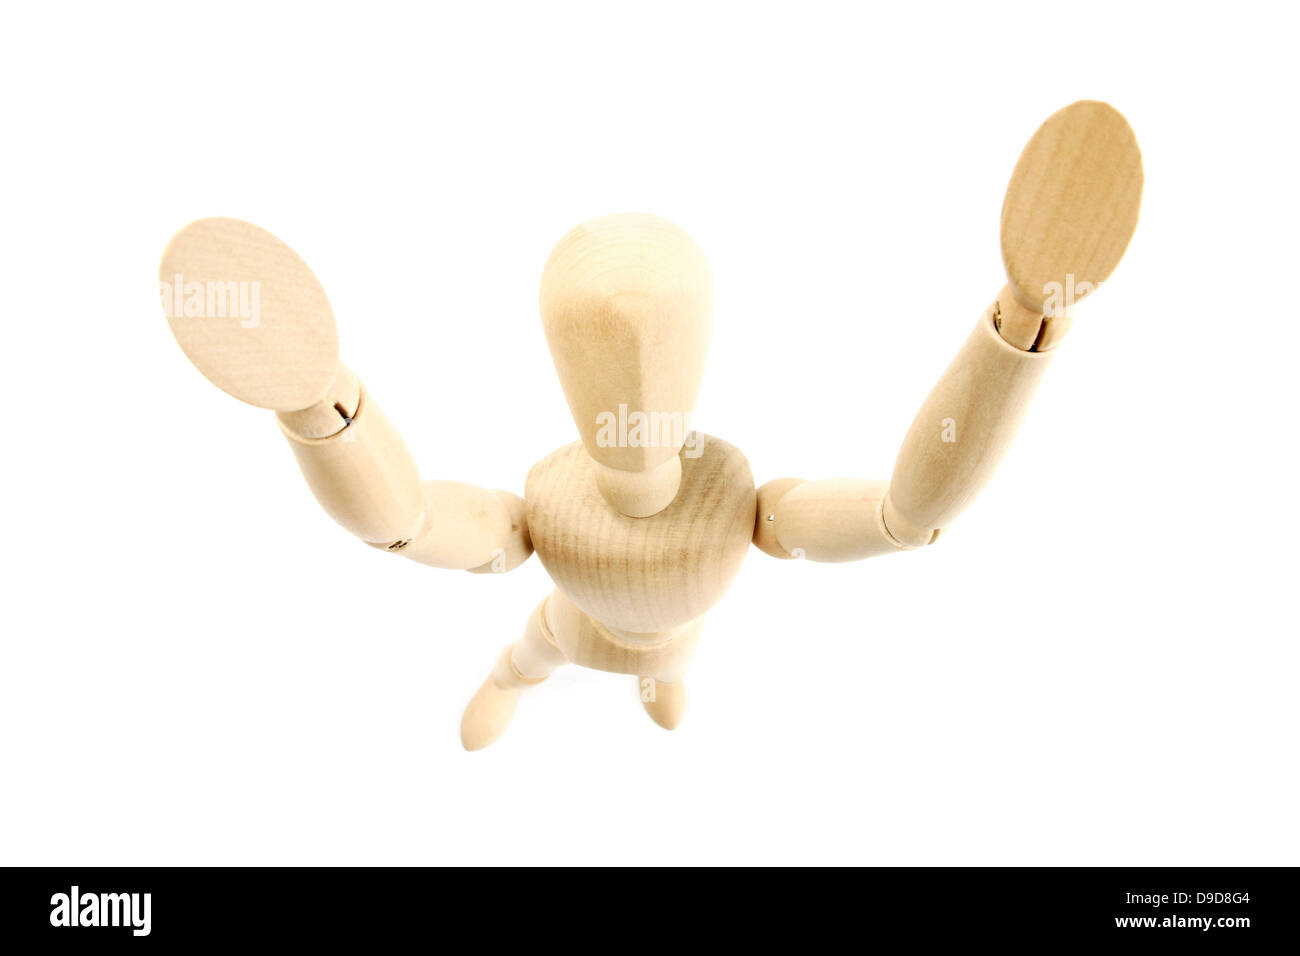 Limb doll with outstretched arms Stock Photo